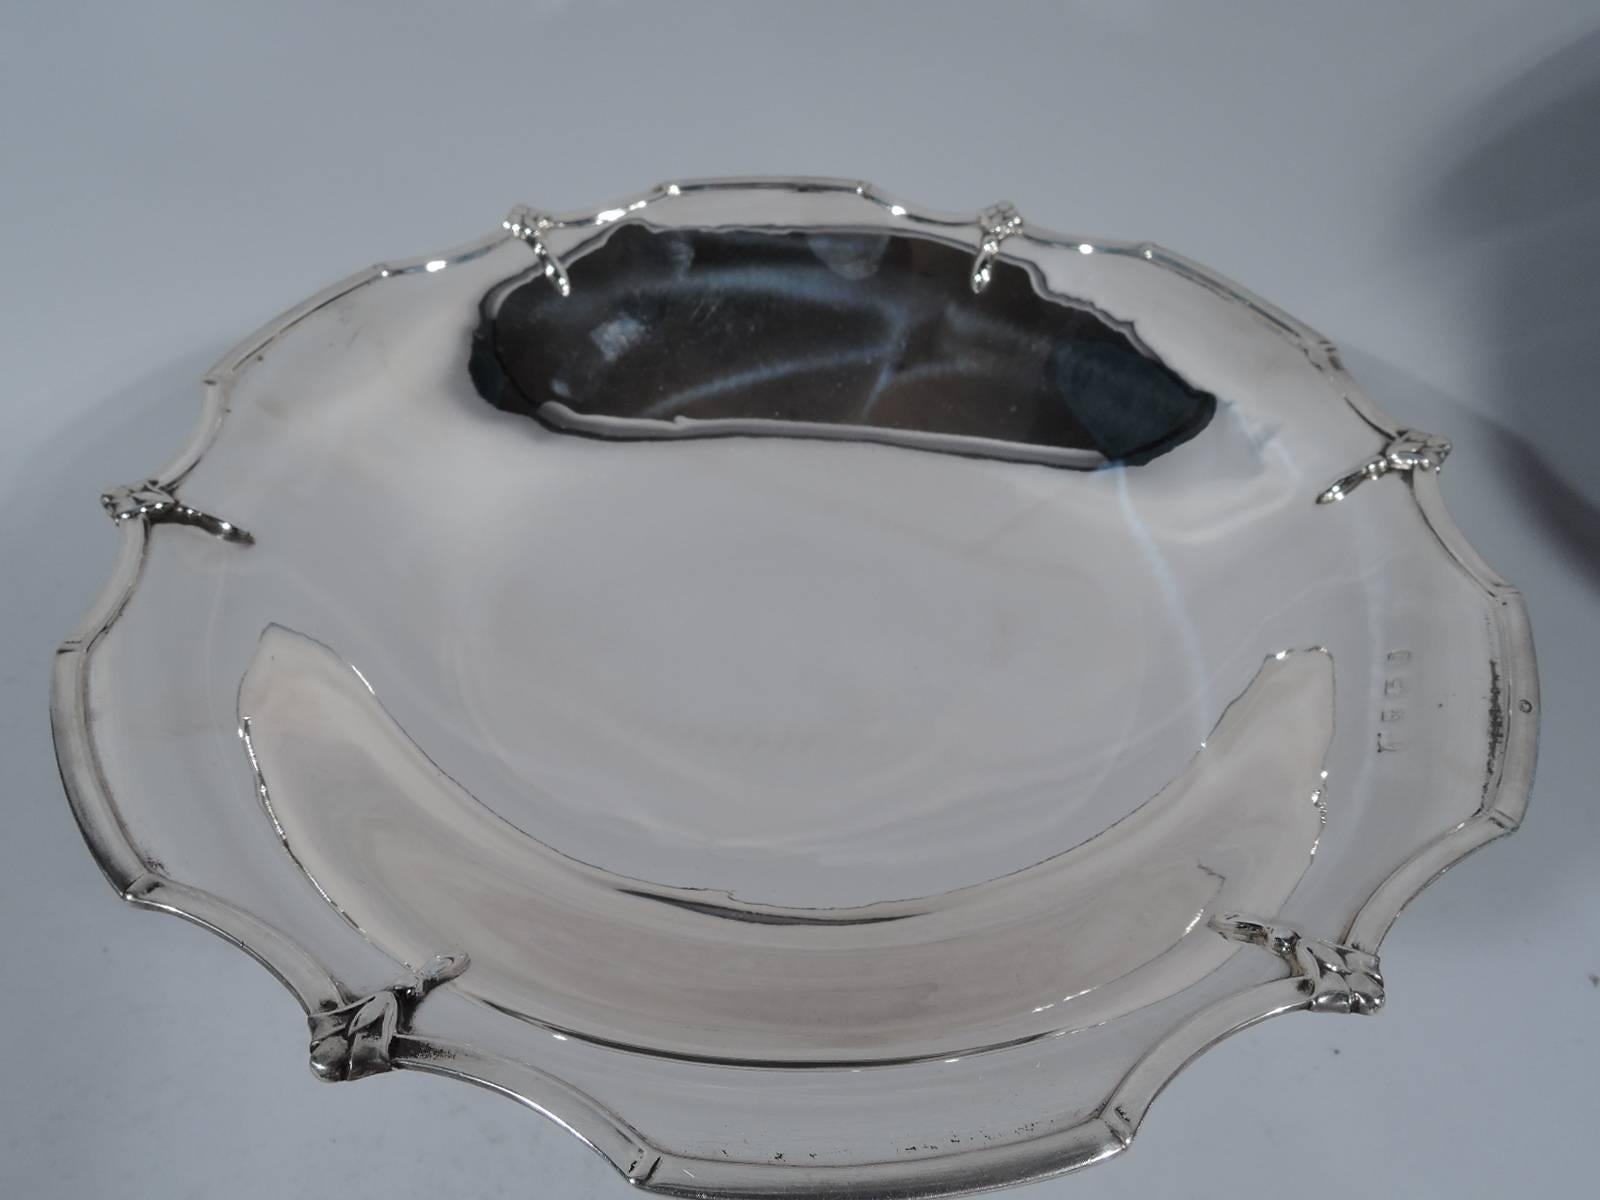 George VI sterling silver compote. Made by Barker Bros in Birmingham in 1940. Bowl on raised foot. Curvilinear rims with applied stylized flowers. Pretty and old fashioned. Hallmark includes French import mark. Measure: Weight 20 troy ounces.